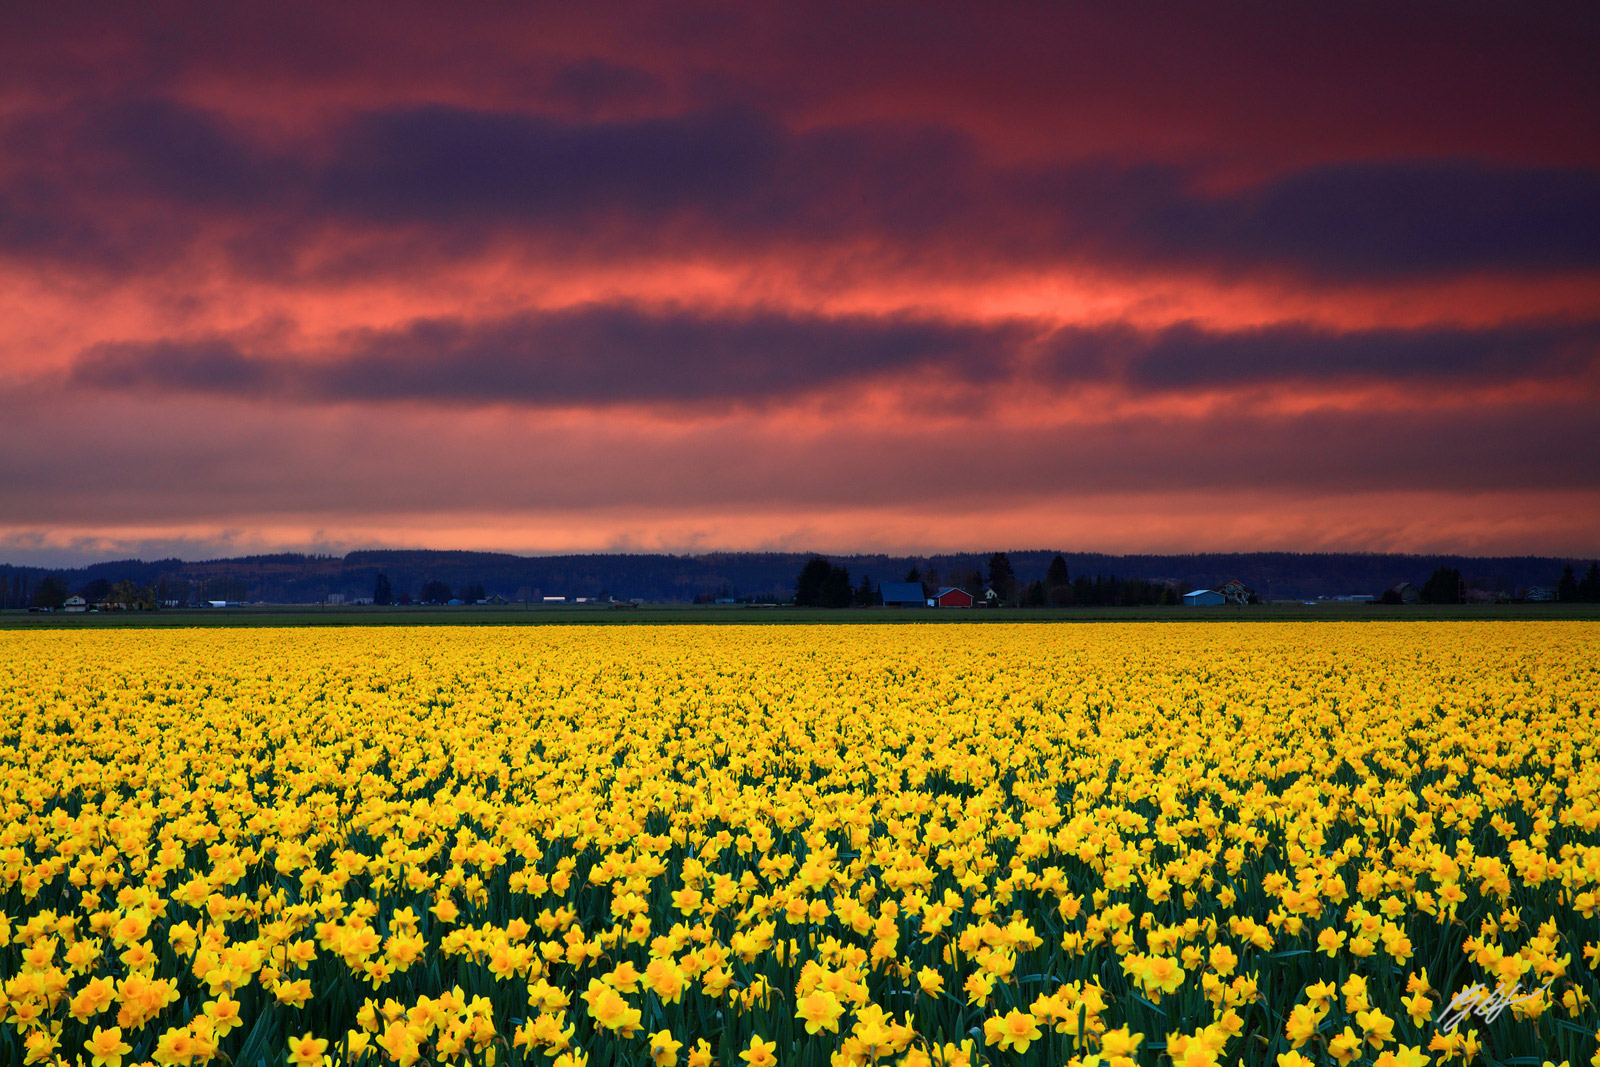 Sunrise over Daffodils and Red Barn in Skagit Valley in Washington